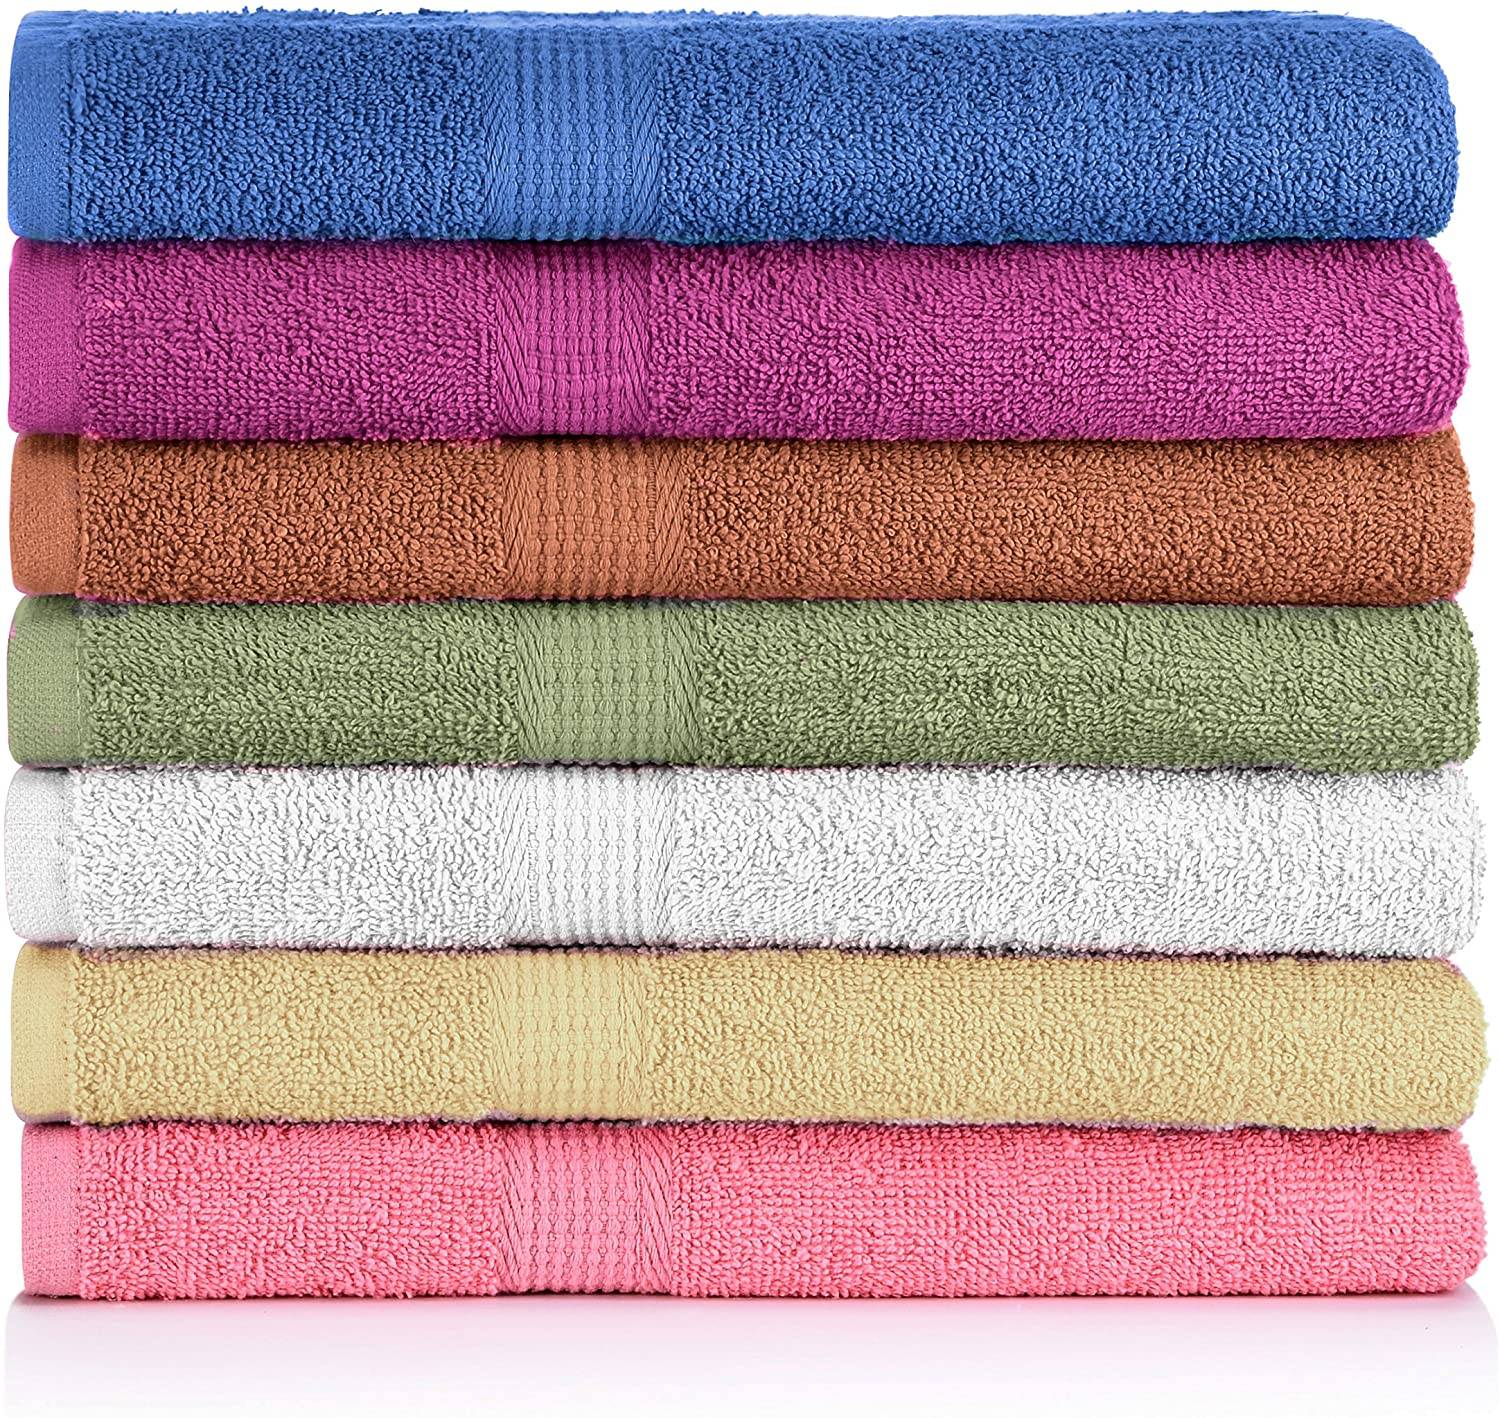 Discount Price Table Mat - Towels/beach towel/ Bath Towels ,Extra-Absorbent – 100% Cotton – 27×54” Towels, Soft and Quick Dry Swim Terry towels with bright colors   – SUPER